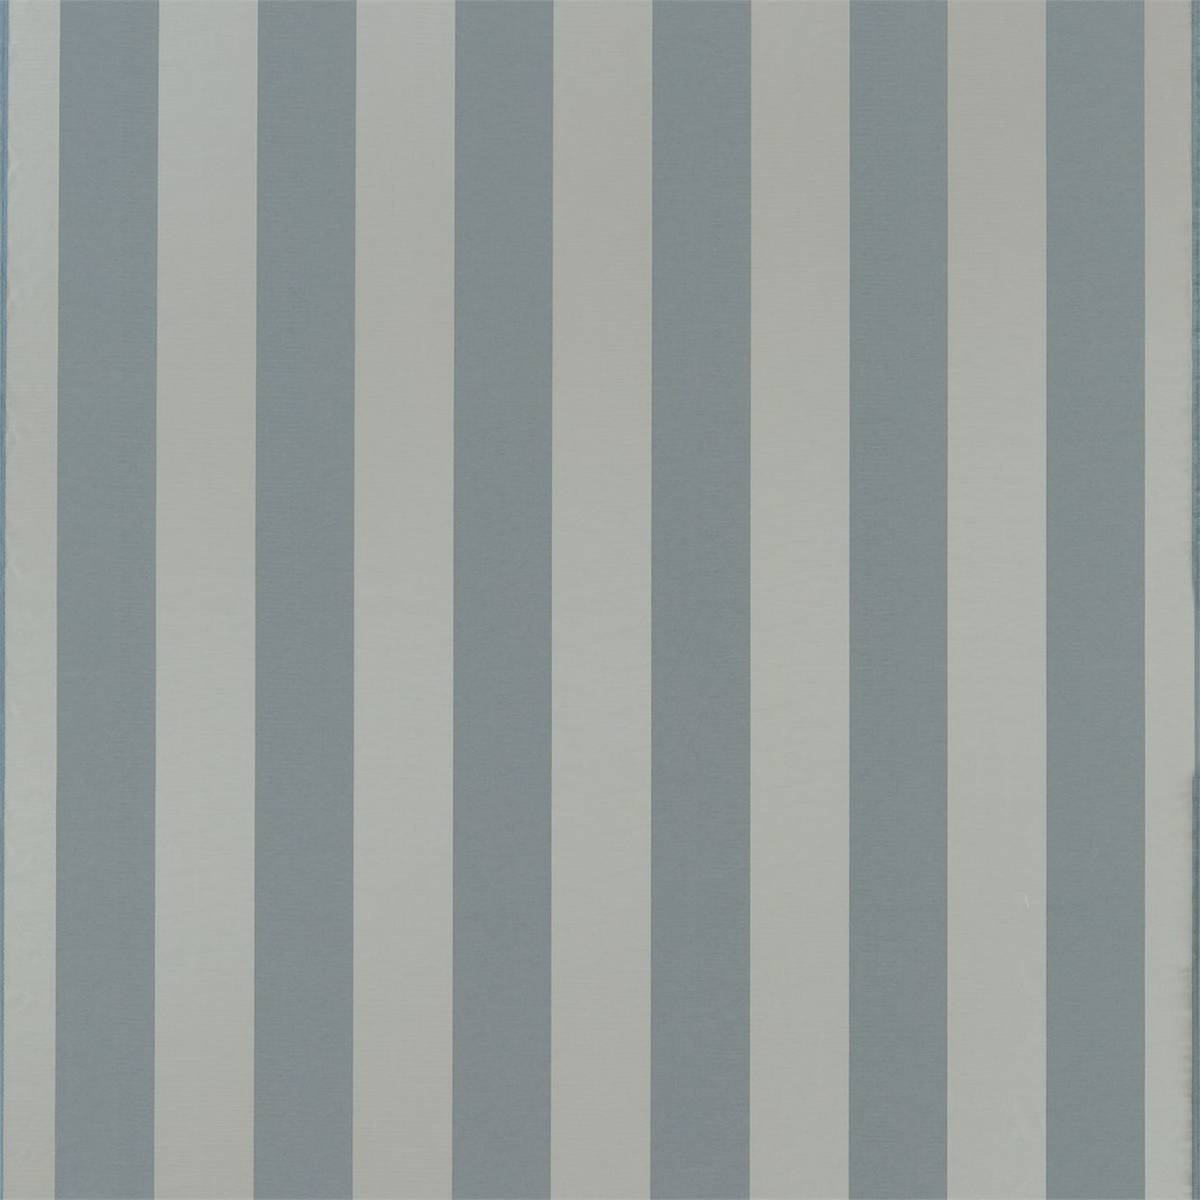 Empathy Stripe Steel Blue and Soft Grey Fabric by Harlequin